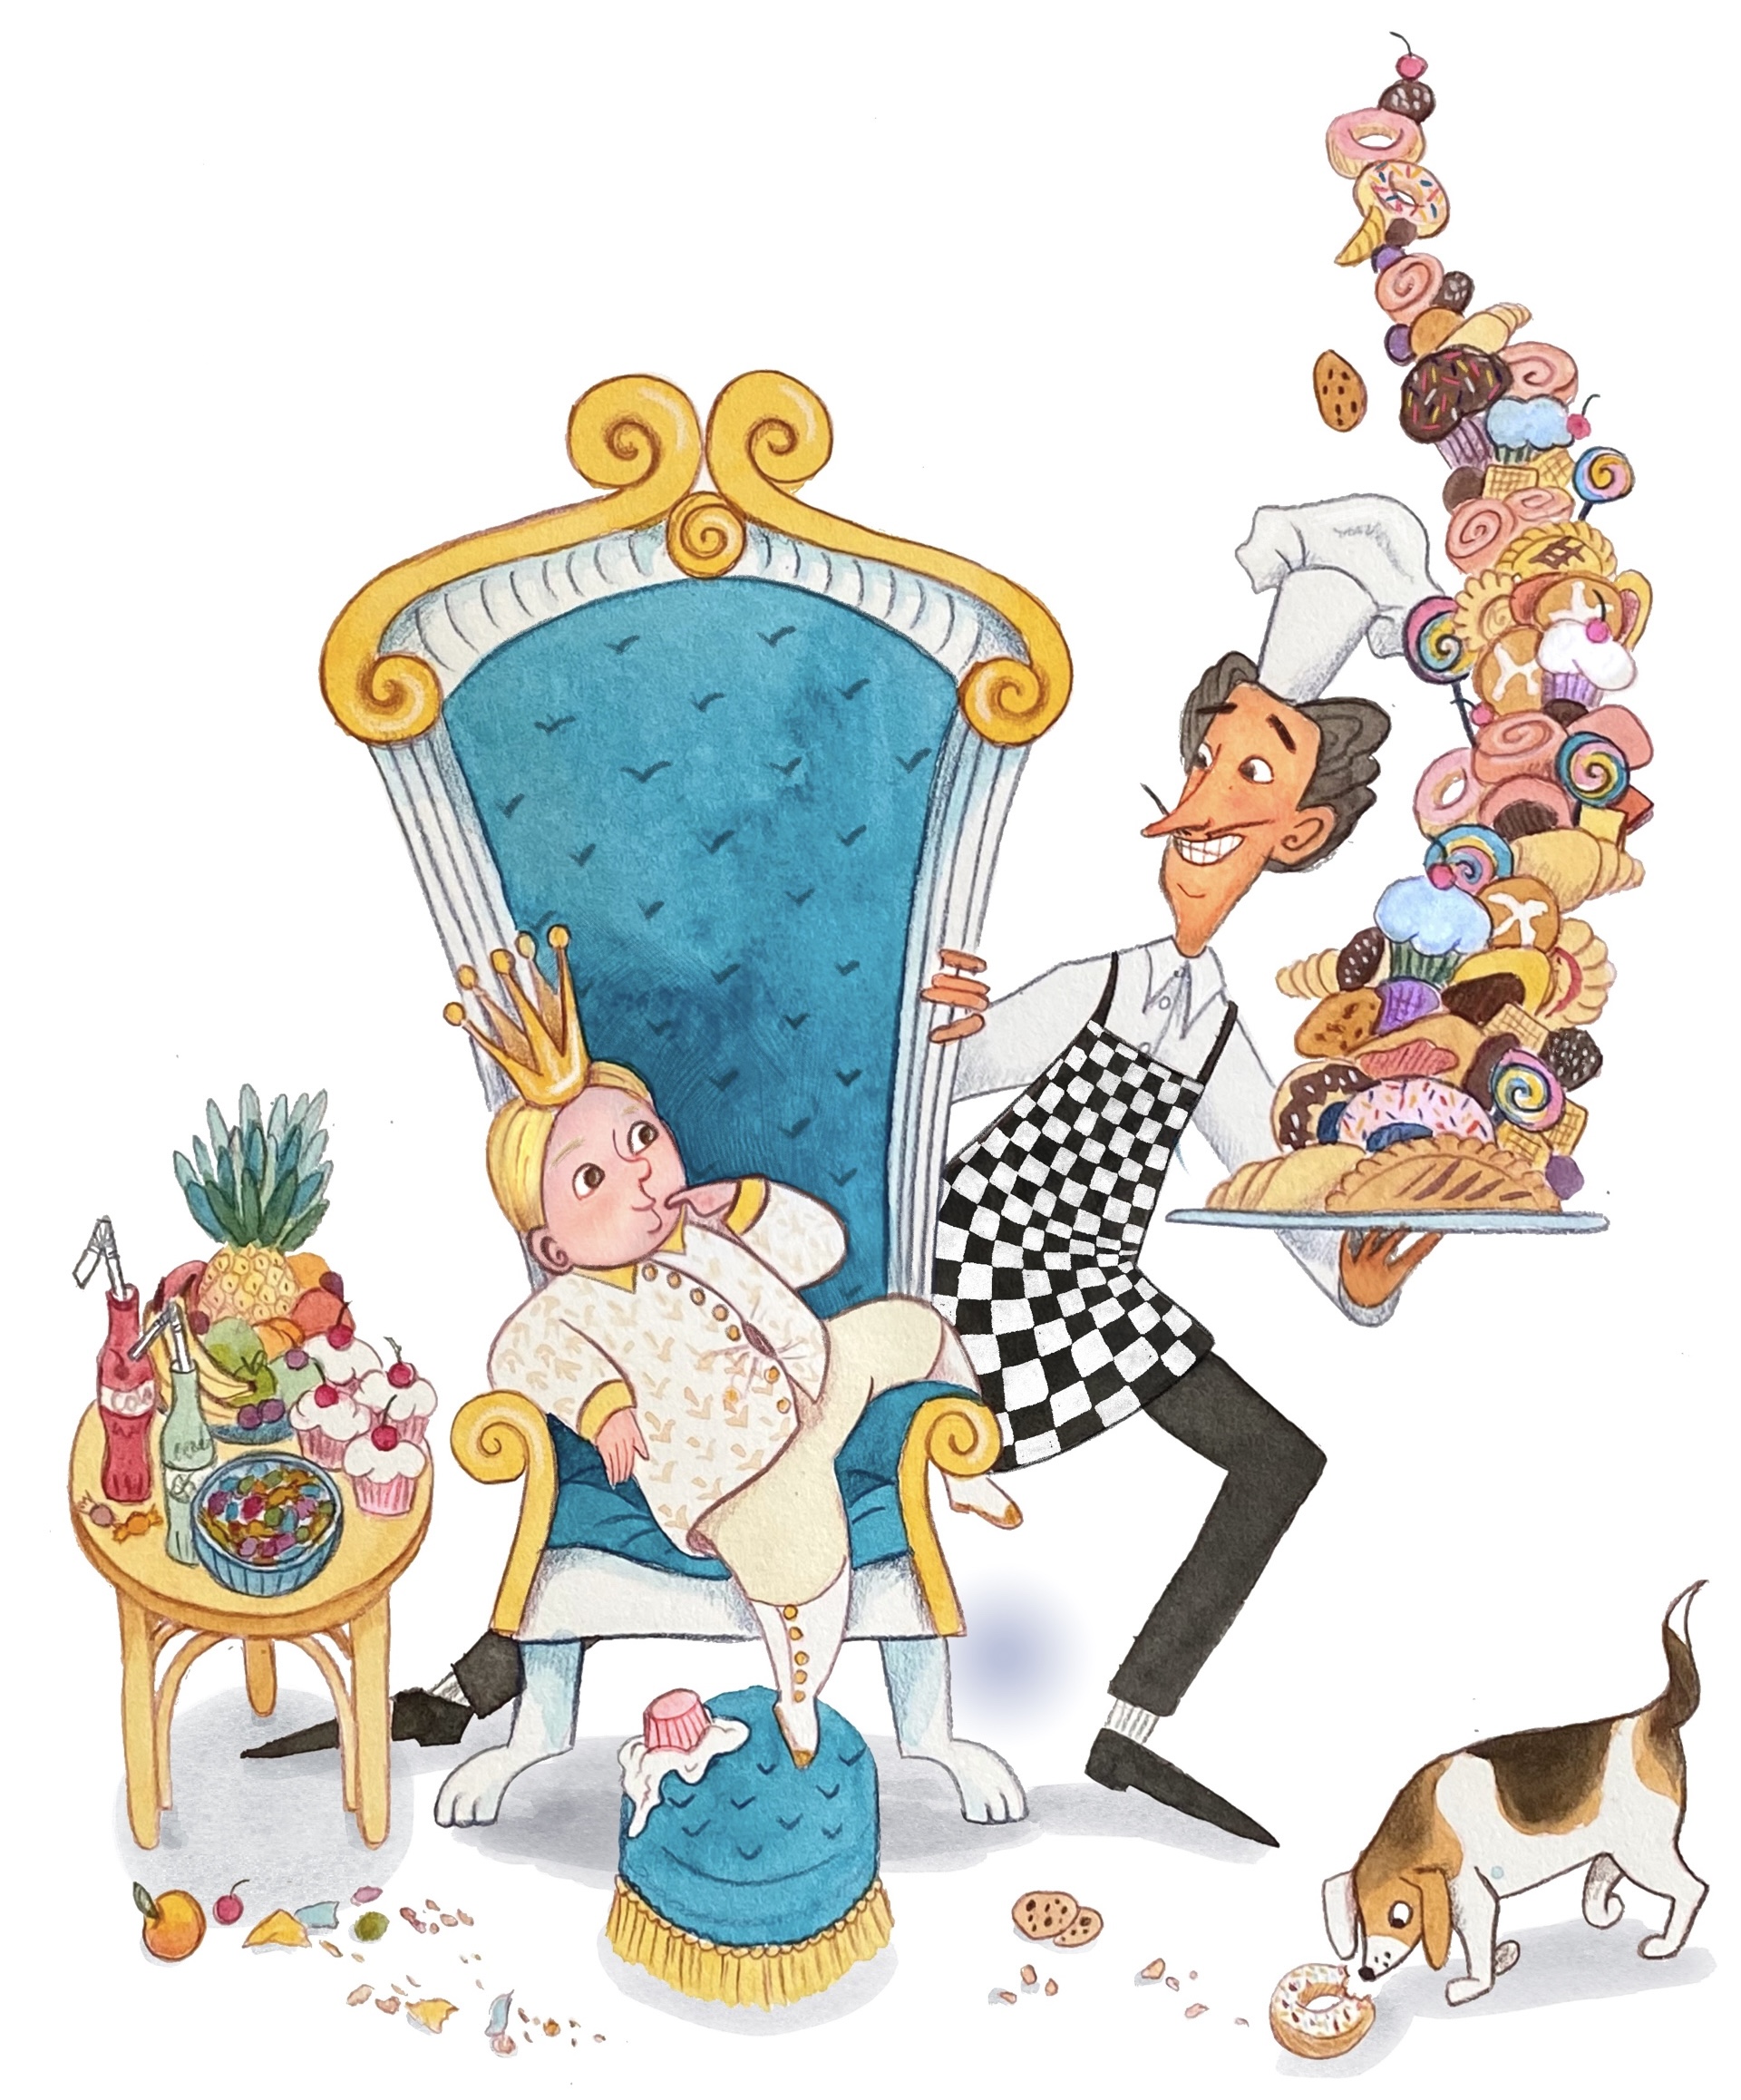 Whimsical watercolor and colored pencil illustration of a nervous pastry chef, leaning out from behind a throne on which sits a plump young prince. The chef is offering the boy a towering plate of pastries . There is a table next to the prince with more goodies piled on it. A small dog sniffs a fallen doughnut with a bite our of it at the chef's feet.